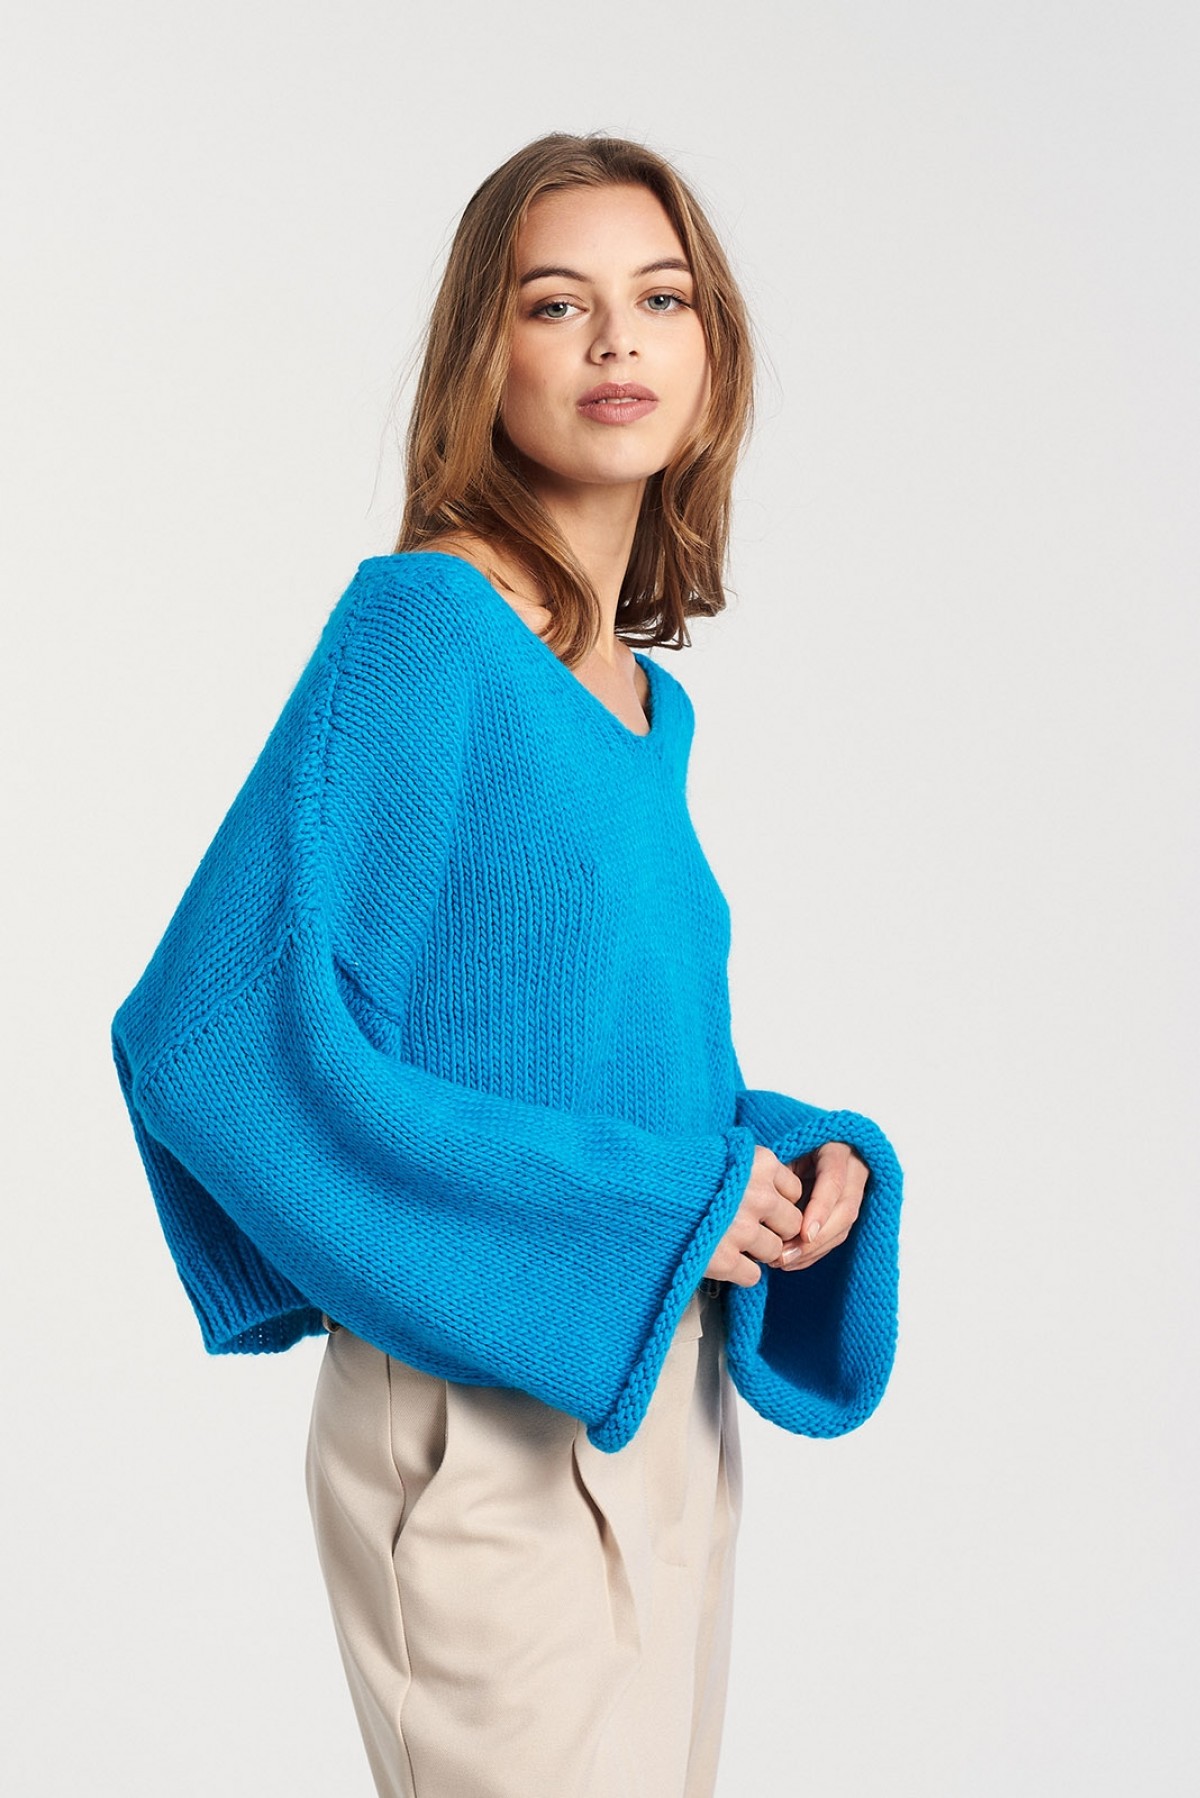 WOOL CROP TOP IN TURQUOISE